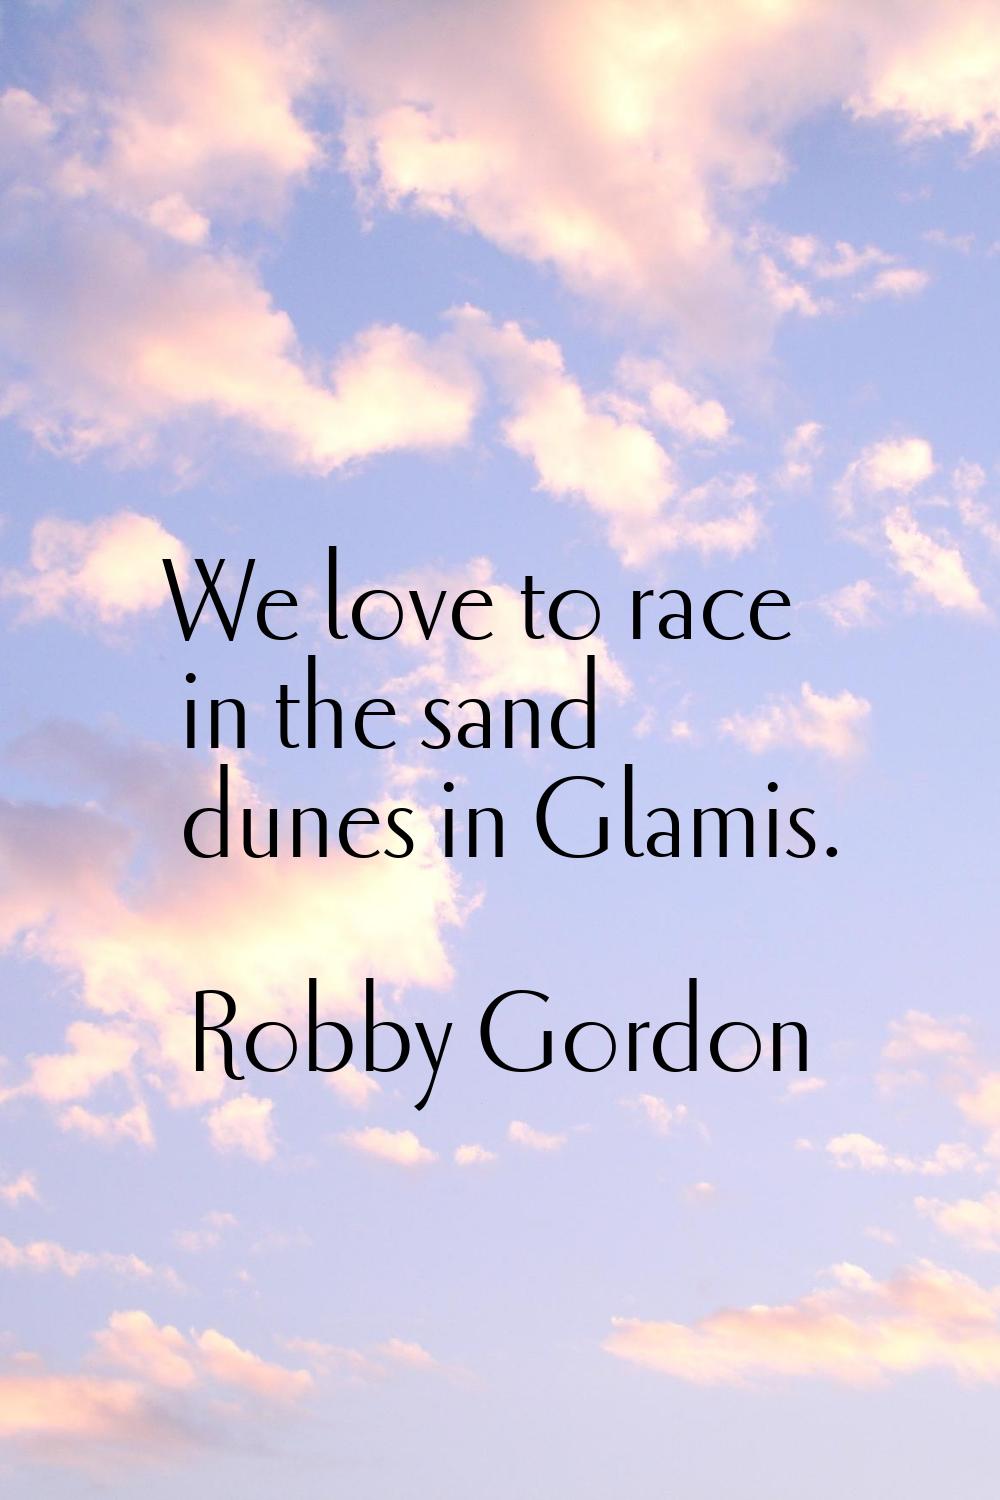 We love to race in the sand dunes in Glamis.